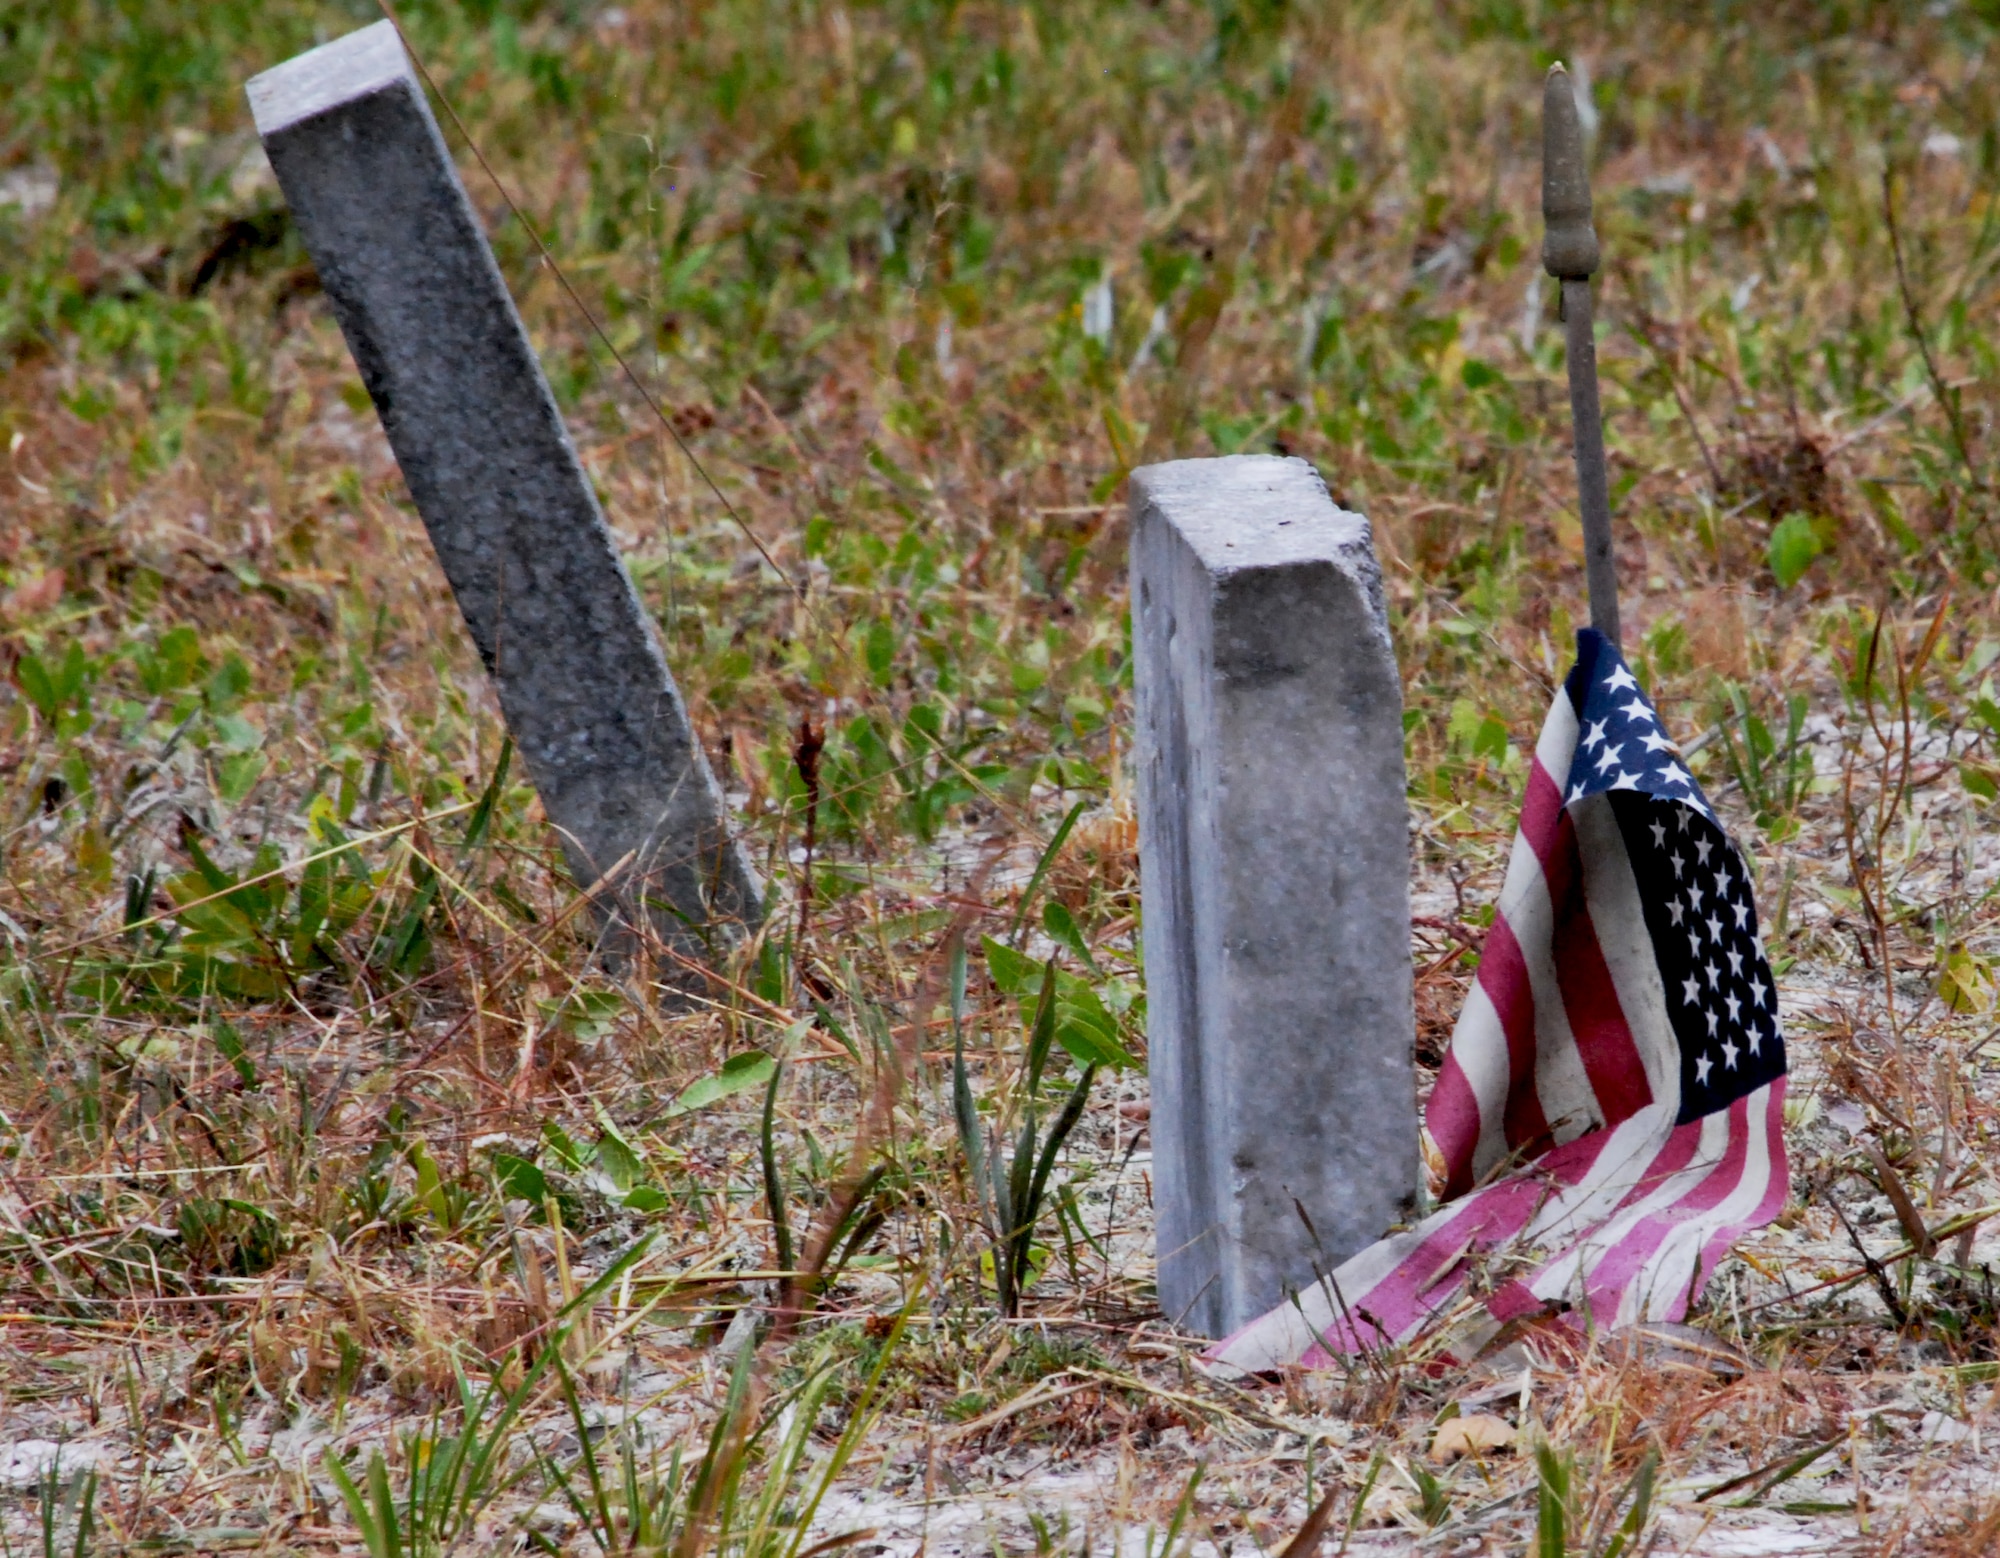 A weathered flag drapes the stars and stripes over an aged headstone at Marywood Cemetery. Marywood Cemetery is one of eleven grave sites at Tyndall. (U.S. Air Force photo by 2nd Lieutenant Christopher Bowyer-Meeder)